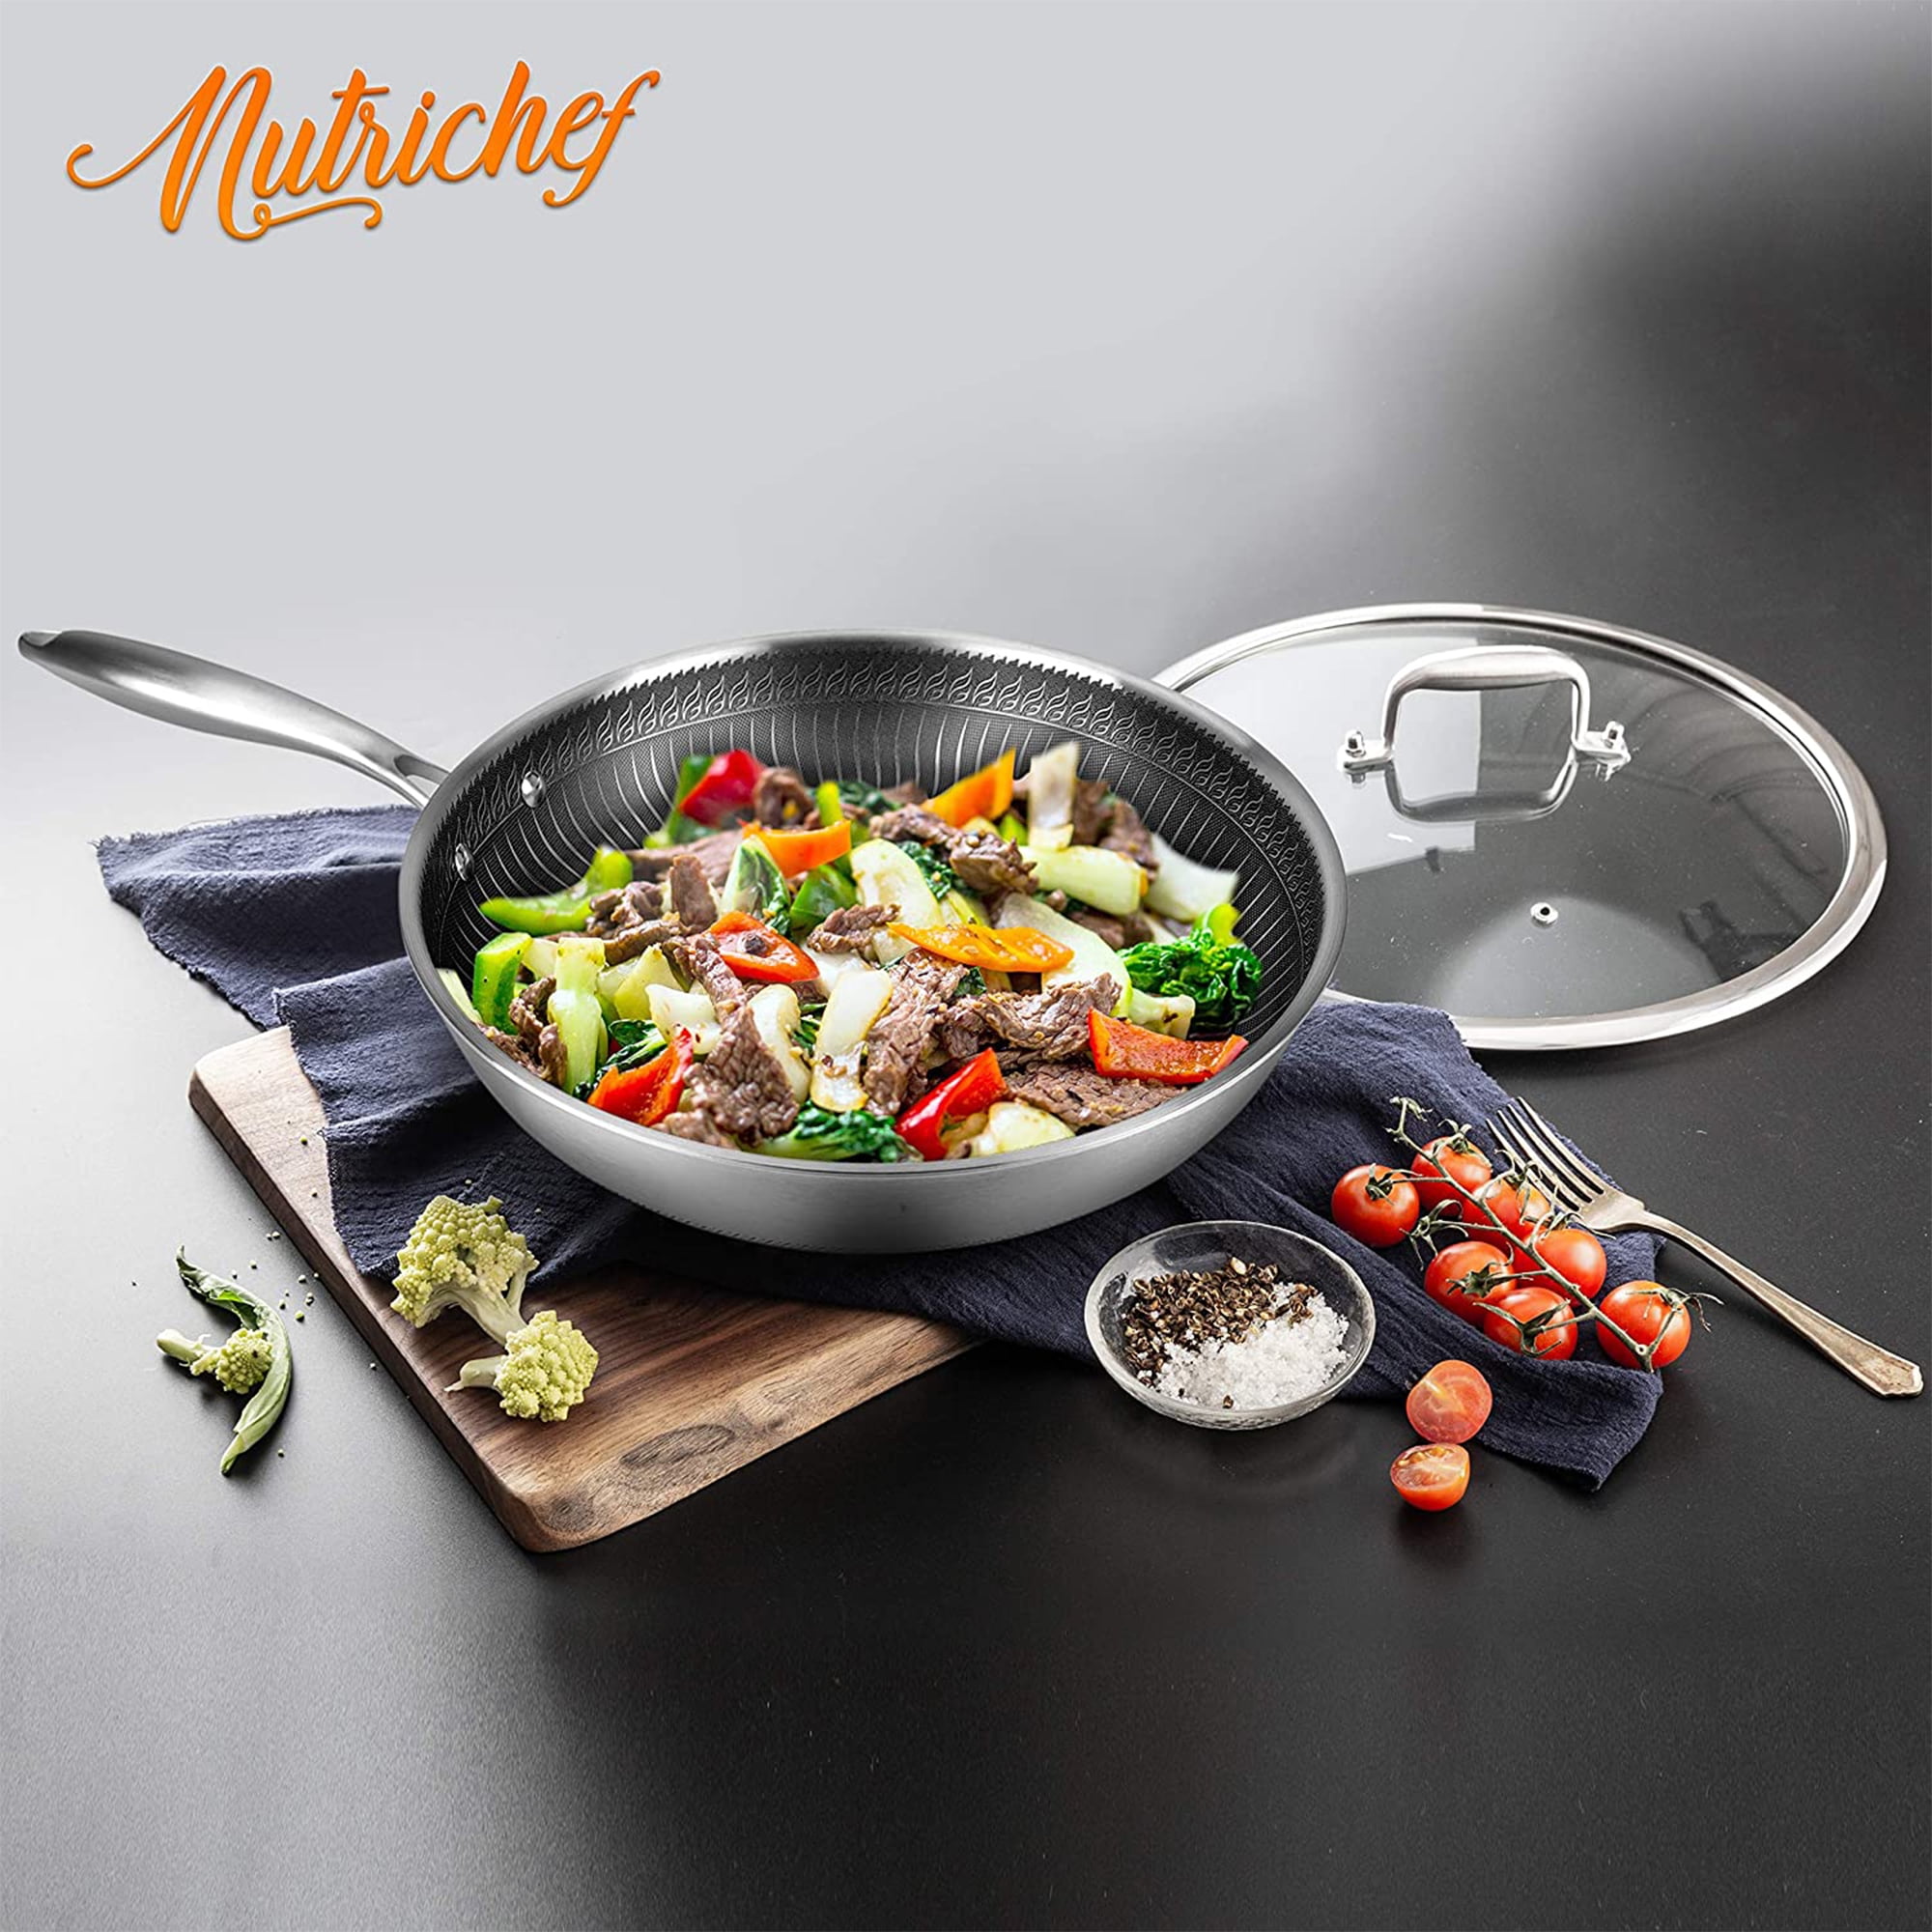 NutriChef 8'' Small Fry Pan - Non-Stick High-Qualified Kitchen Cookware -  Brown